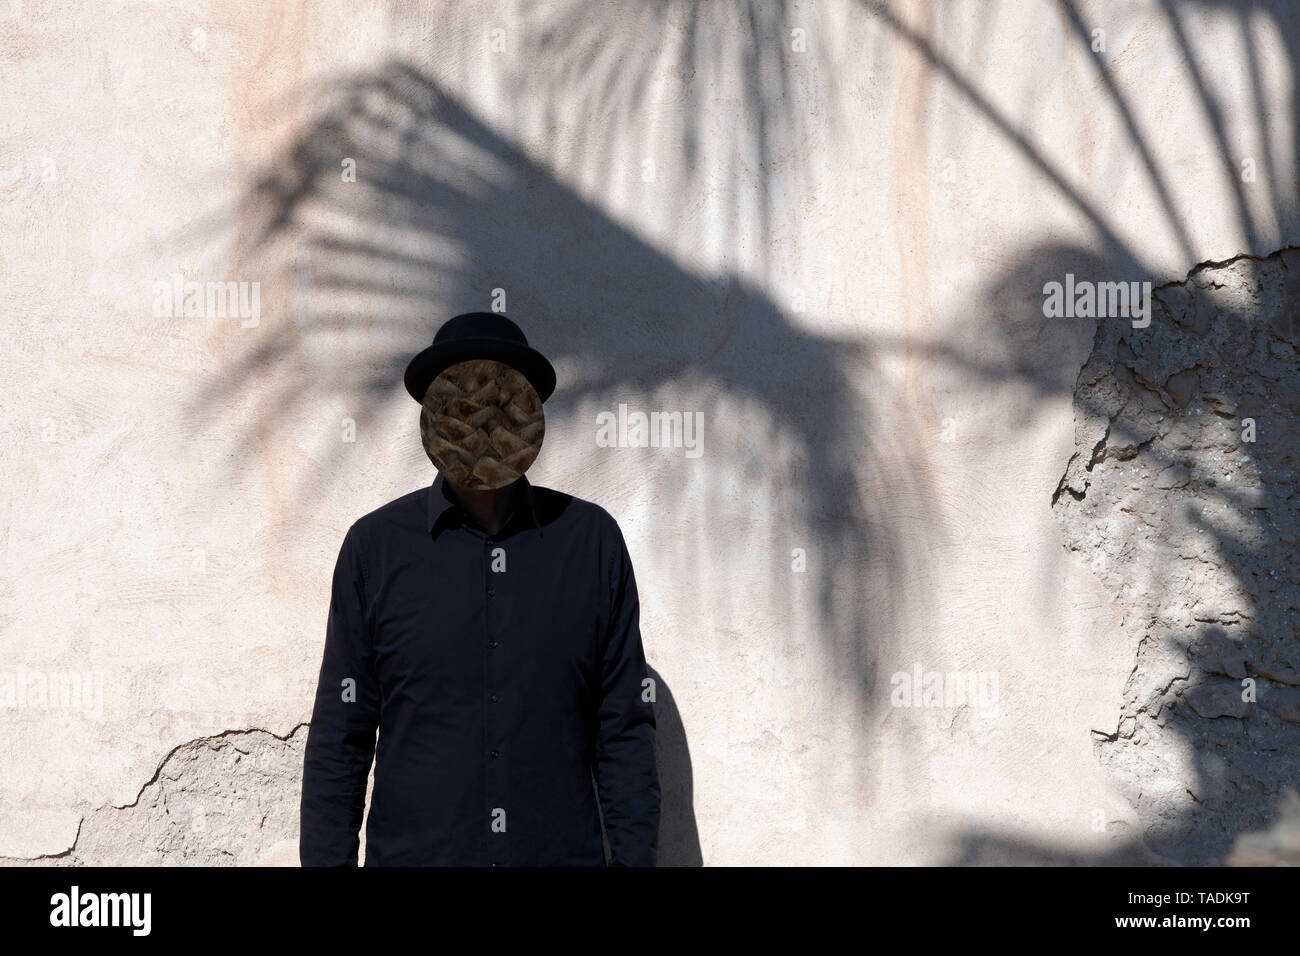 Morocco, Essaouira, man with obscured face wearing a bowler hat at a wall Stock Photo